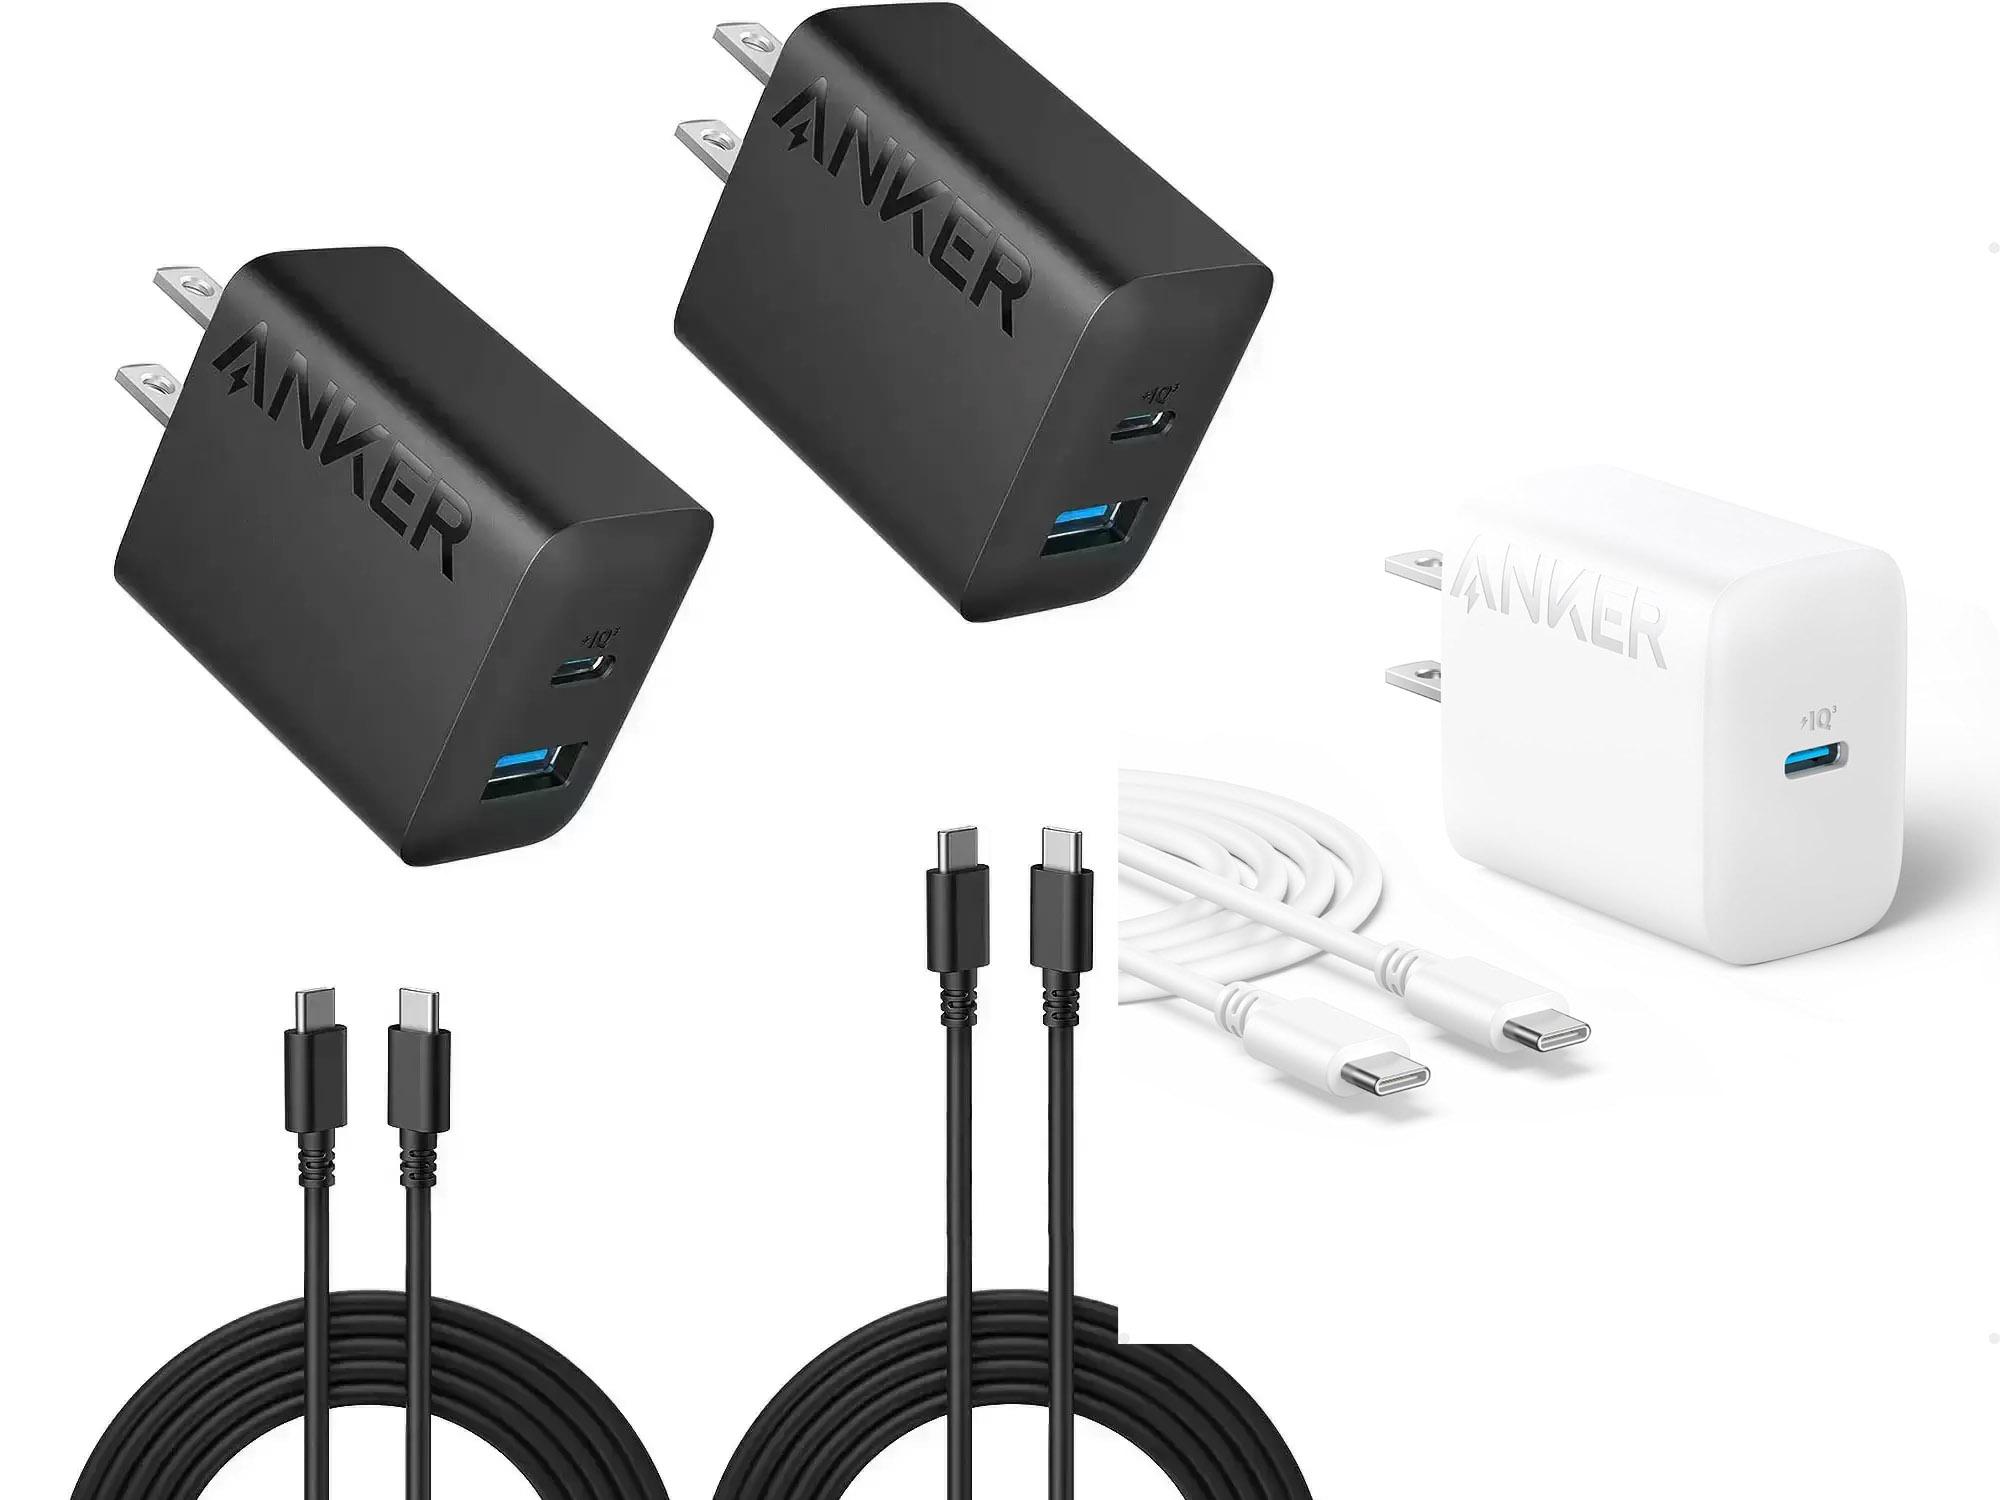 Anker 20W USB-C + USB-A 2 Pack + Anker 20w USBC Charger for $12.99 Shipped